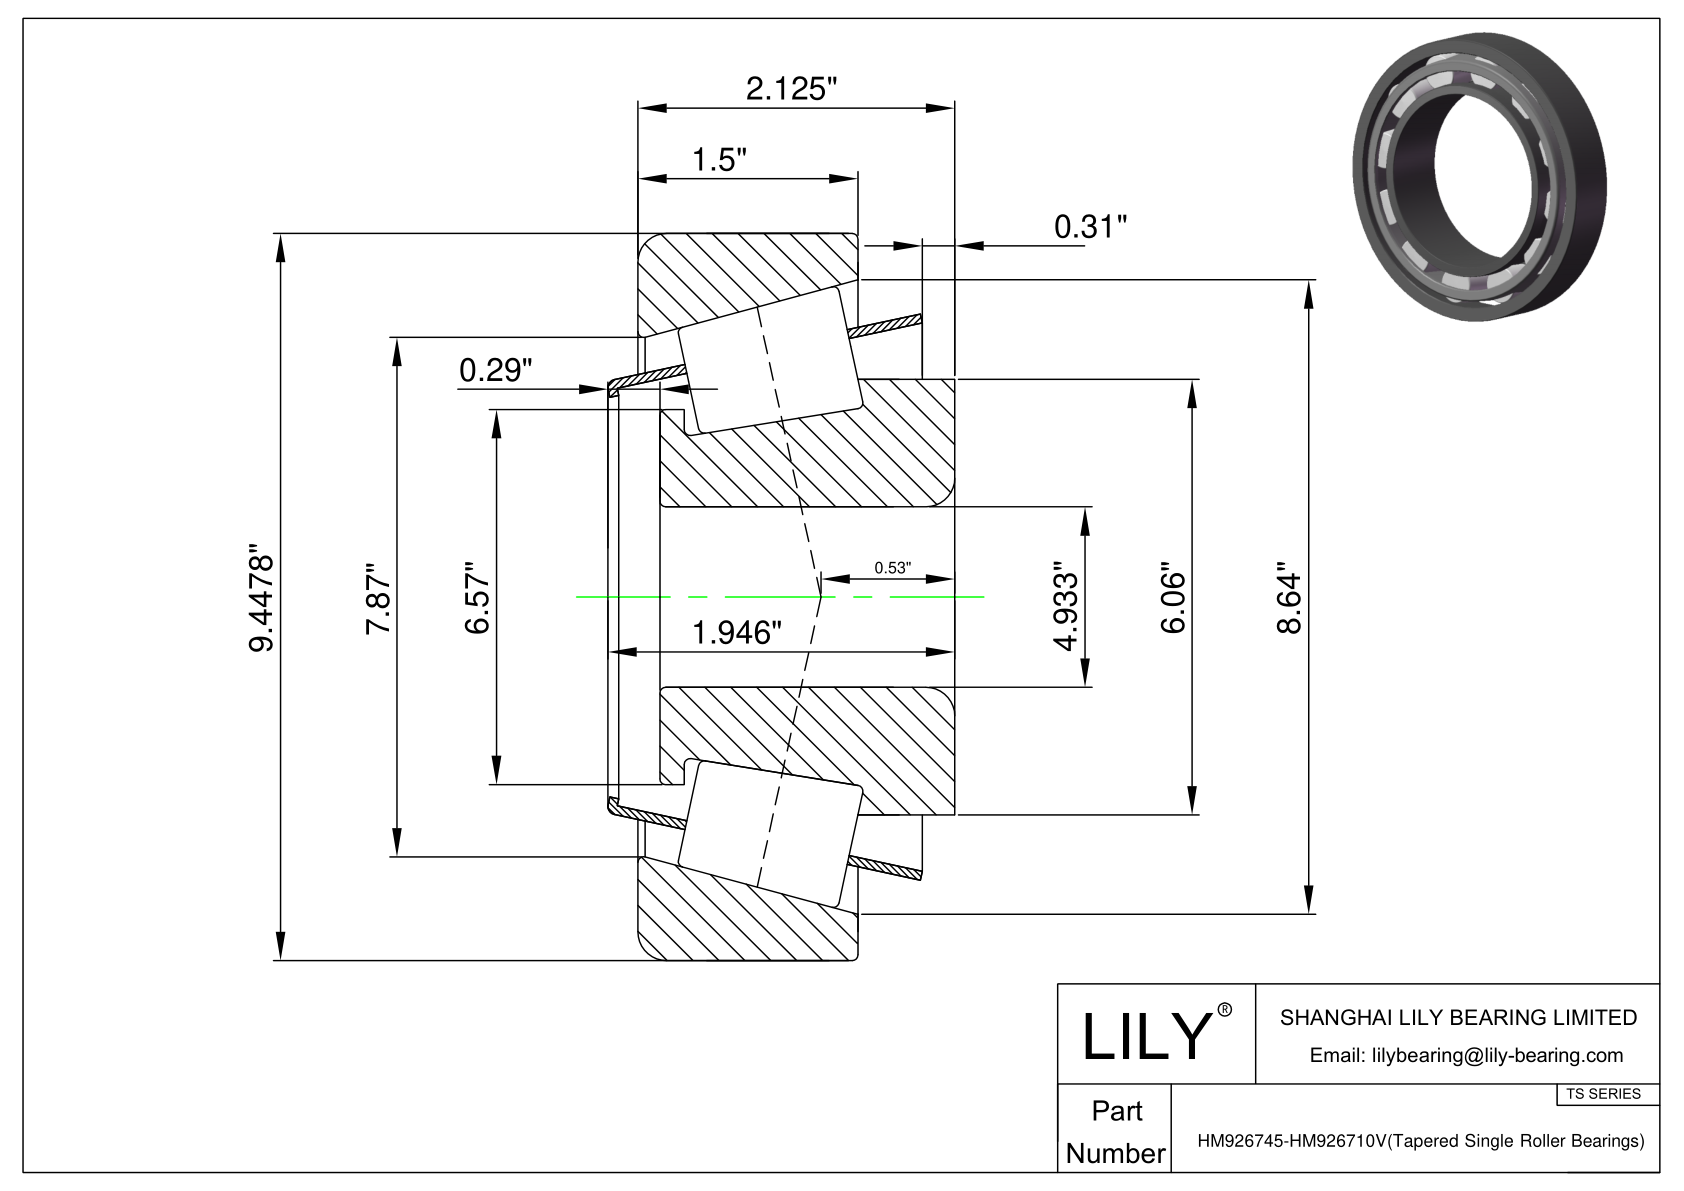 HM926745-HM926710V TS (Tapered Single Roller Bearings) (Imperial) cad drawing